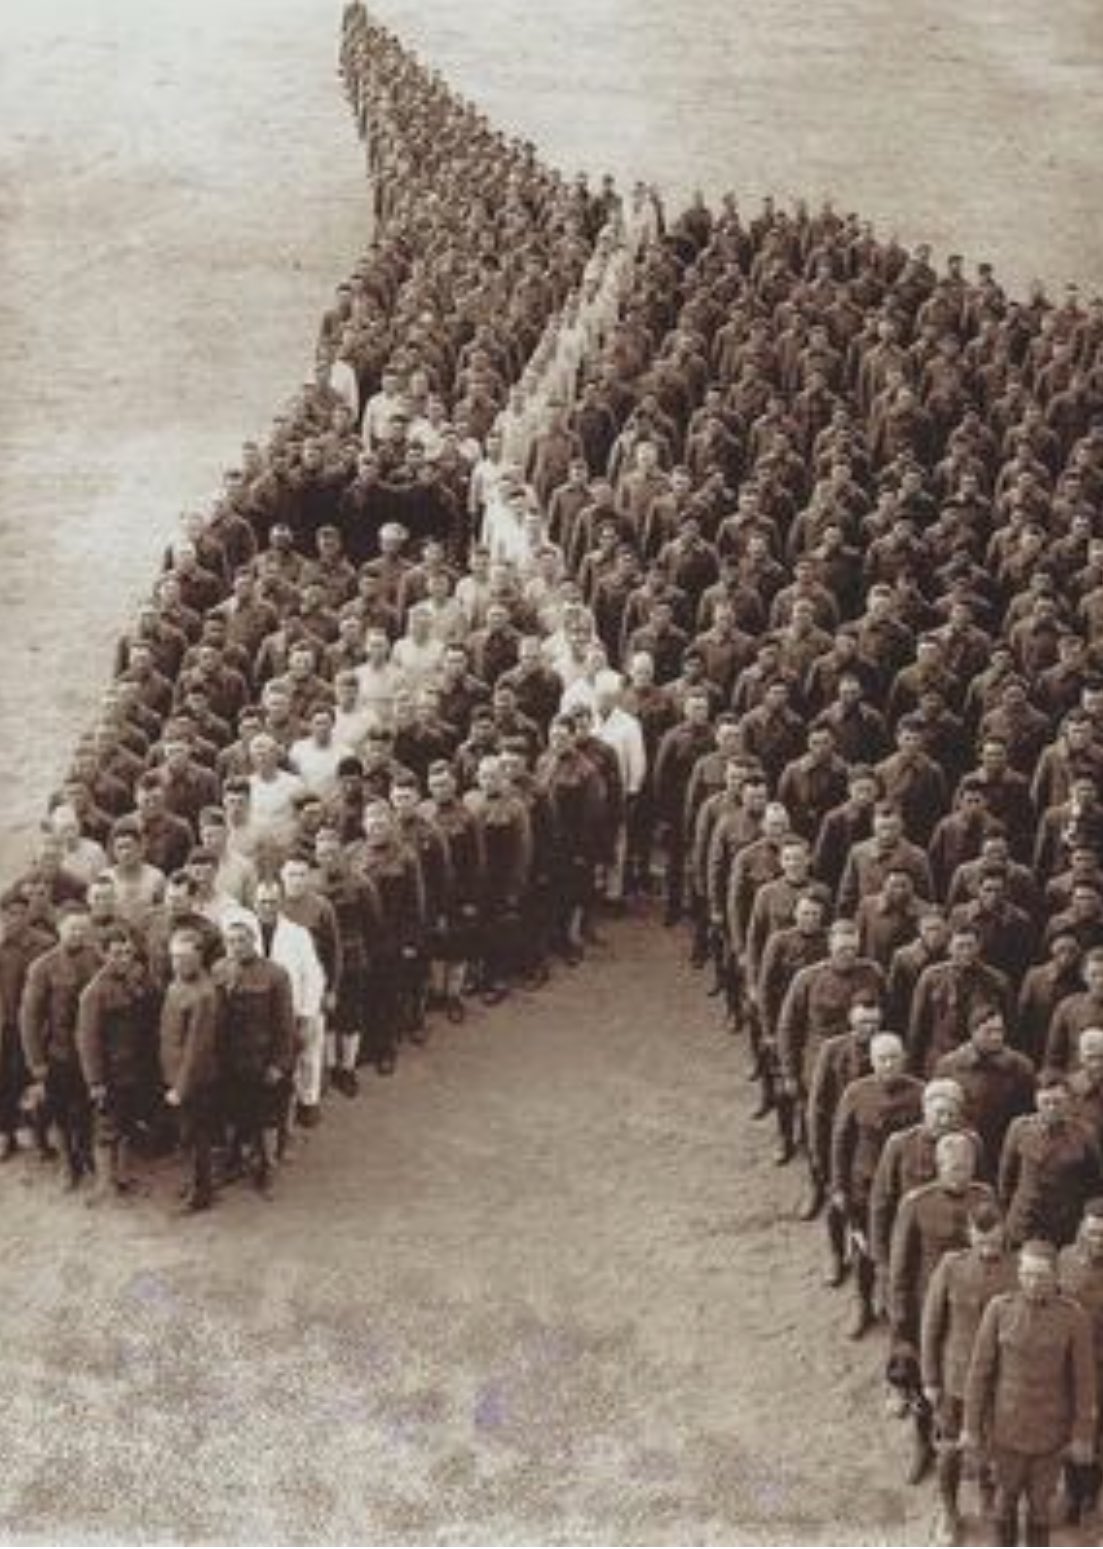 U.S. troopers pay tribute to the 8 million horses, donkeys and mules that misplaced their lives for the period of World War 1.